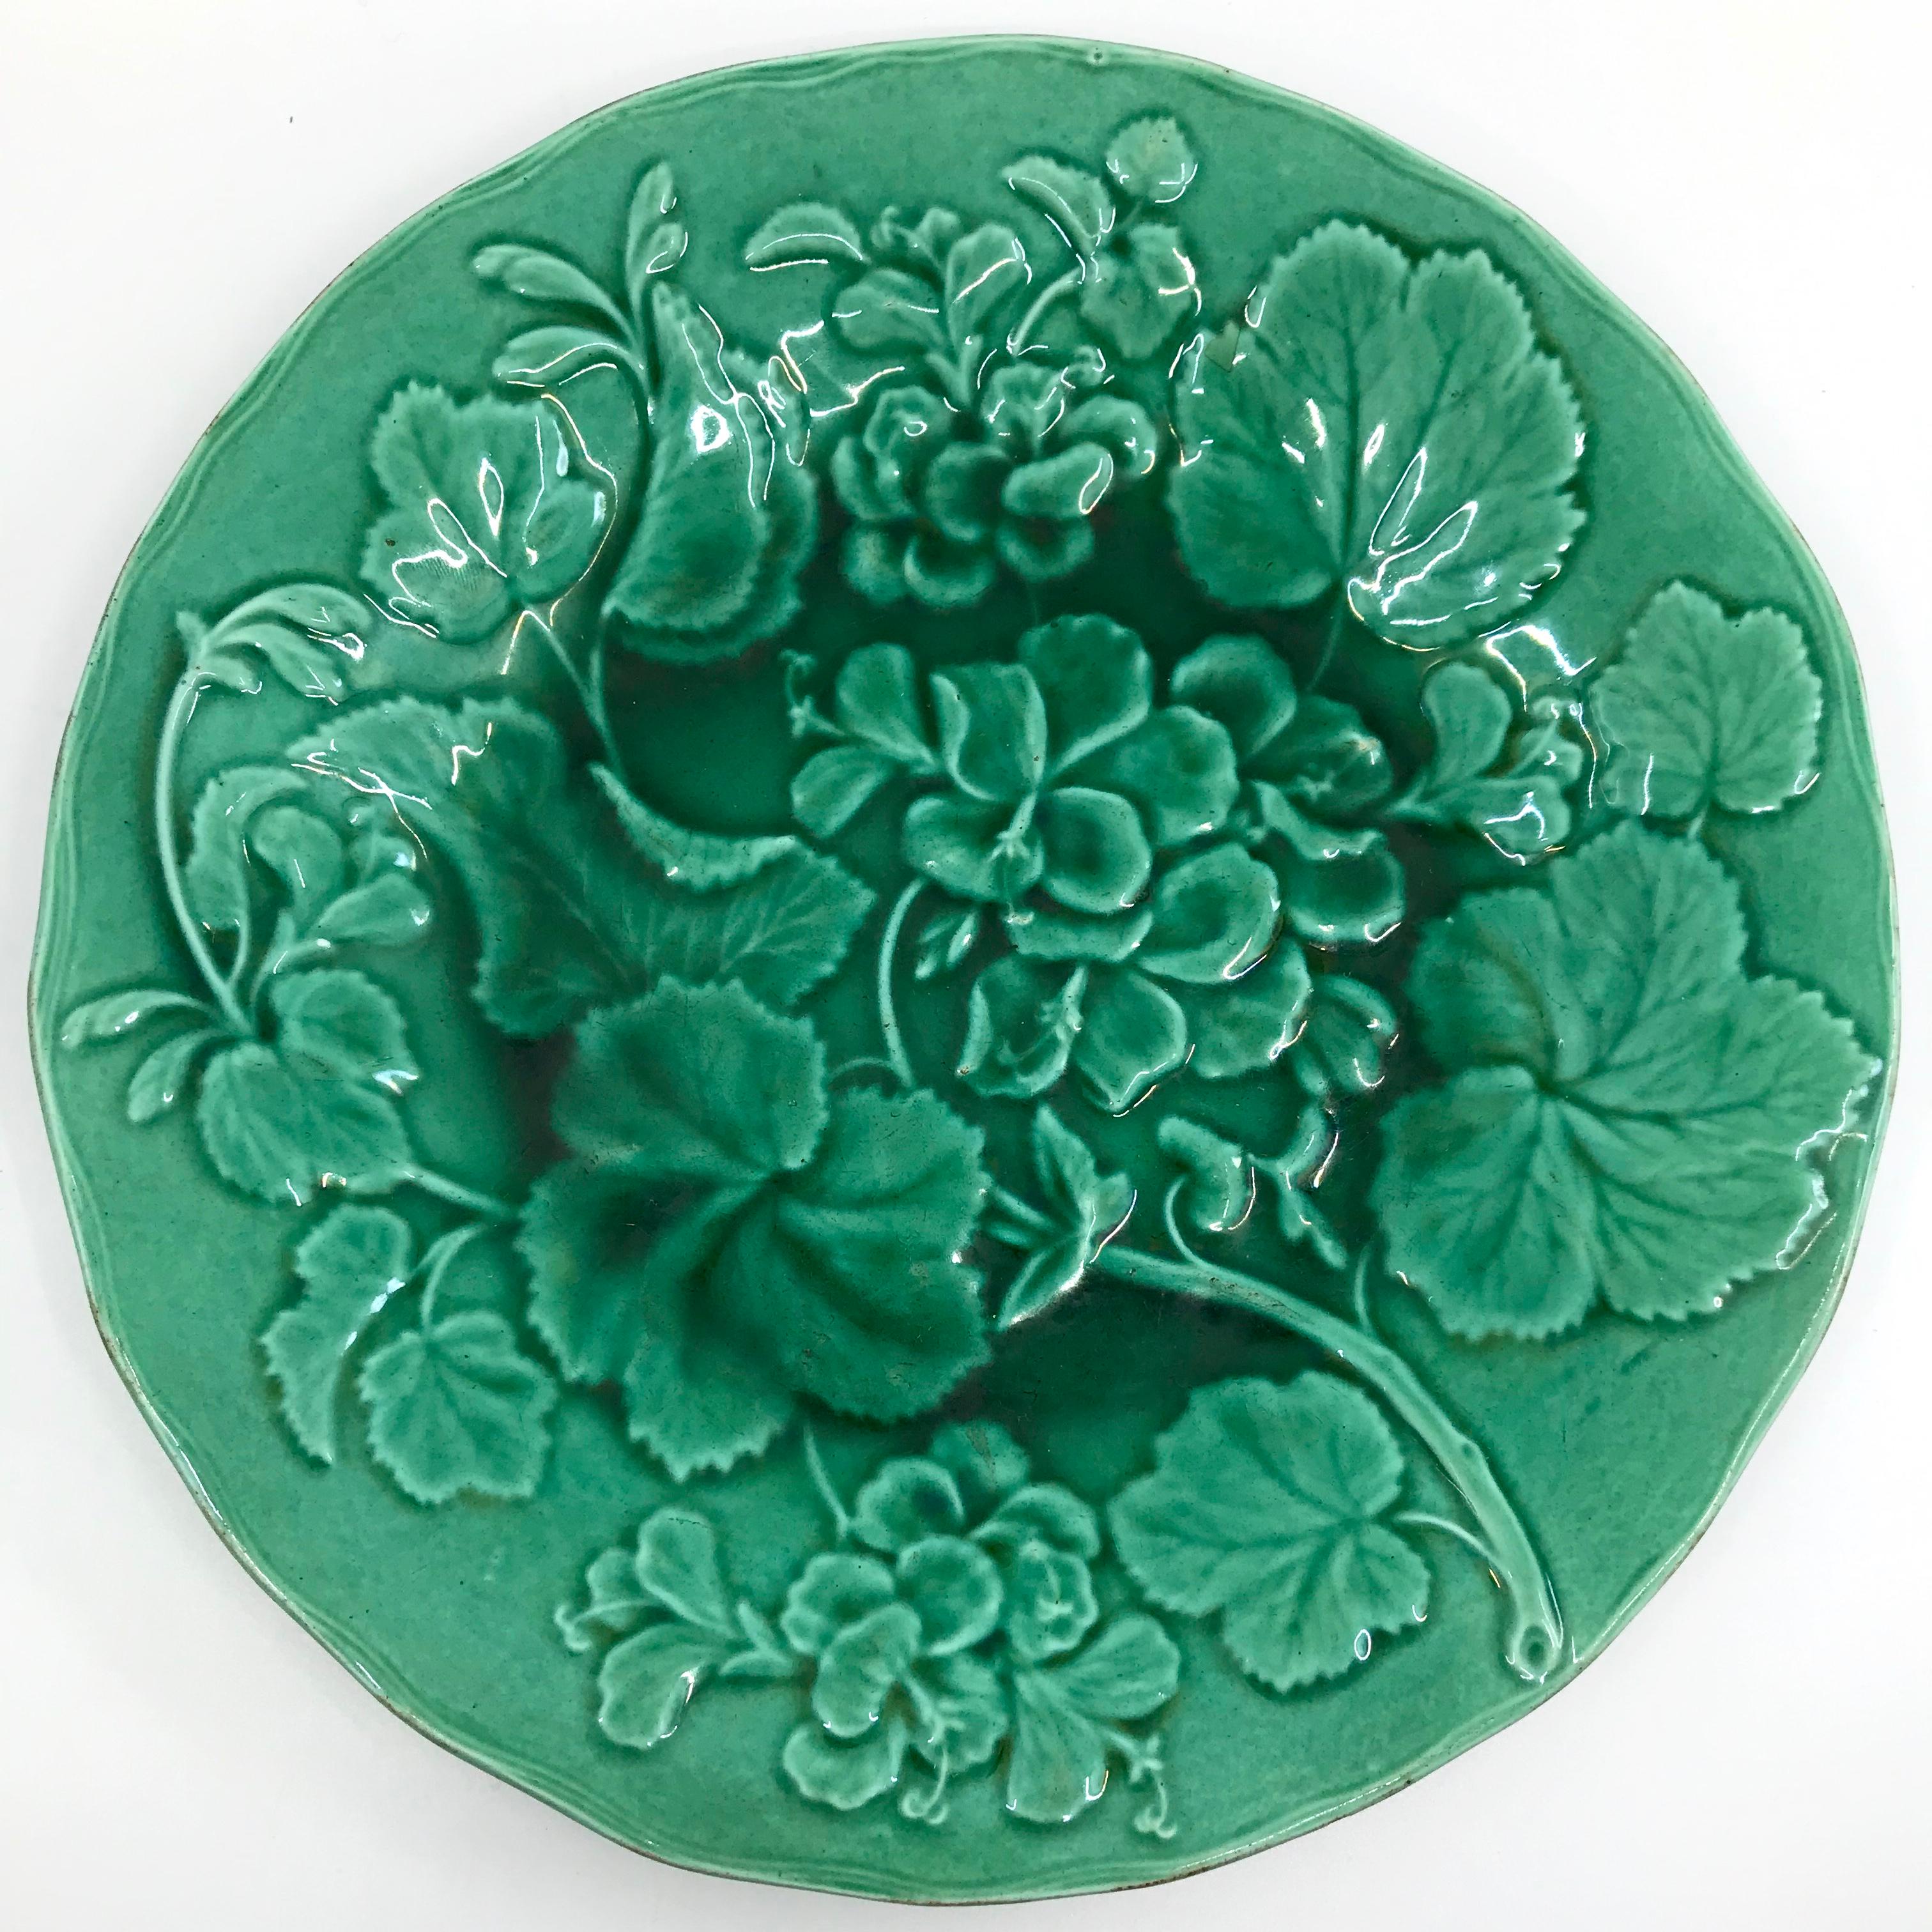 Pair of green majolica geranium plates. Pair of English softly scalloped-edge majolica plates in deep green glaze with geranium flower and leaf motif; one with hairline crack at edge England, late 1800's.
Dimensions: 9” diameter x 1.07” height.